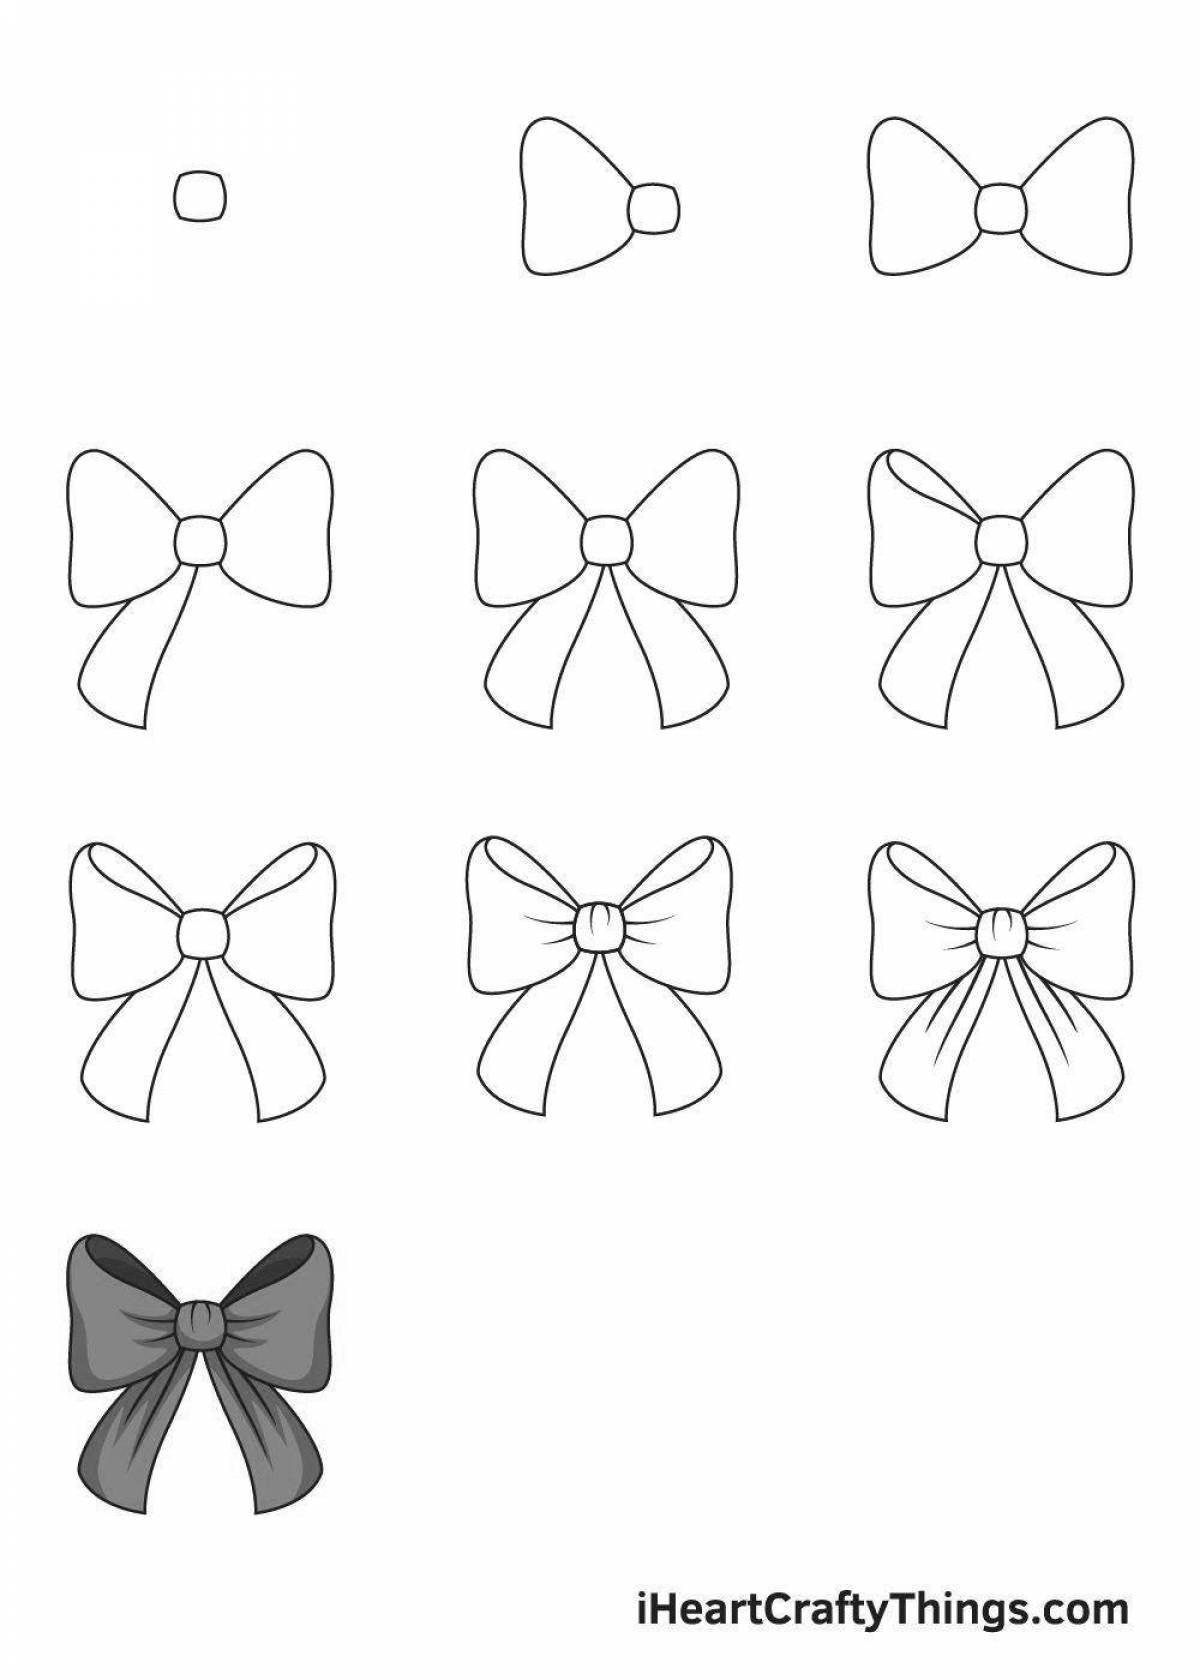 Coloring book funny bow for preschoolers